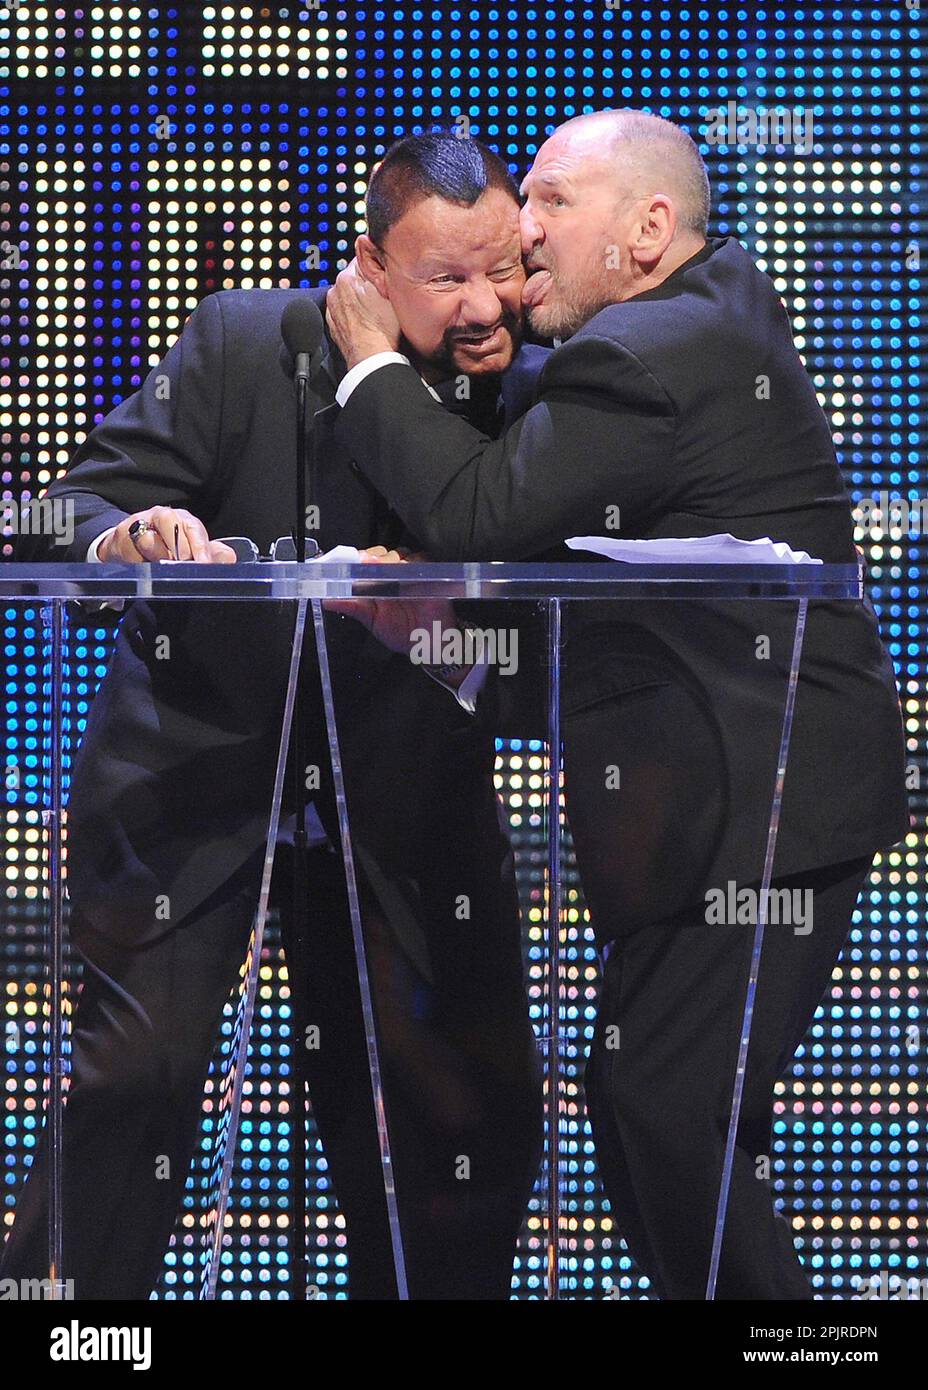 **FILE PHOTO** Bushwhacker Butch Has Passed Away At 78. New York, NY- March 28: The Bushwhackers: Luke Williams and Butch Miller are inducted into the 2015 WWE Hall Of Fame on March 28, 2015 at the SAP Center in San Jose, California. Credit: George Napolitano/MediaPunch Stock Photo